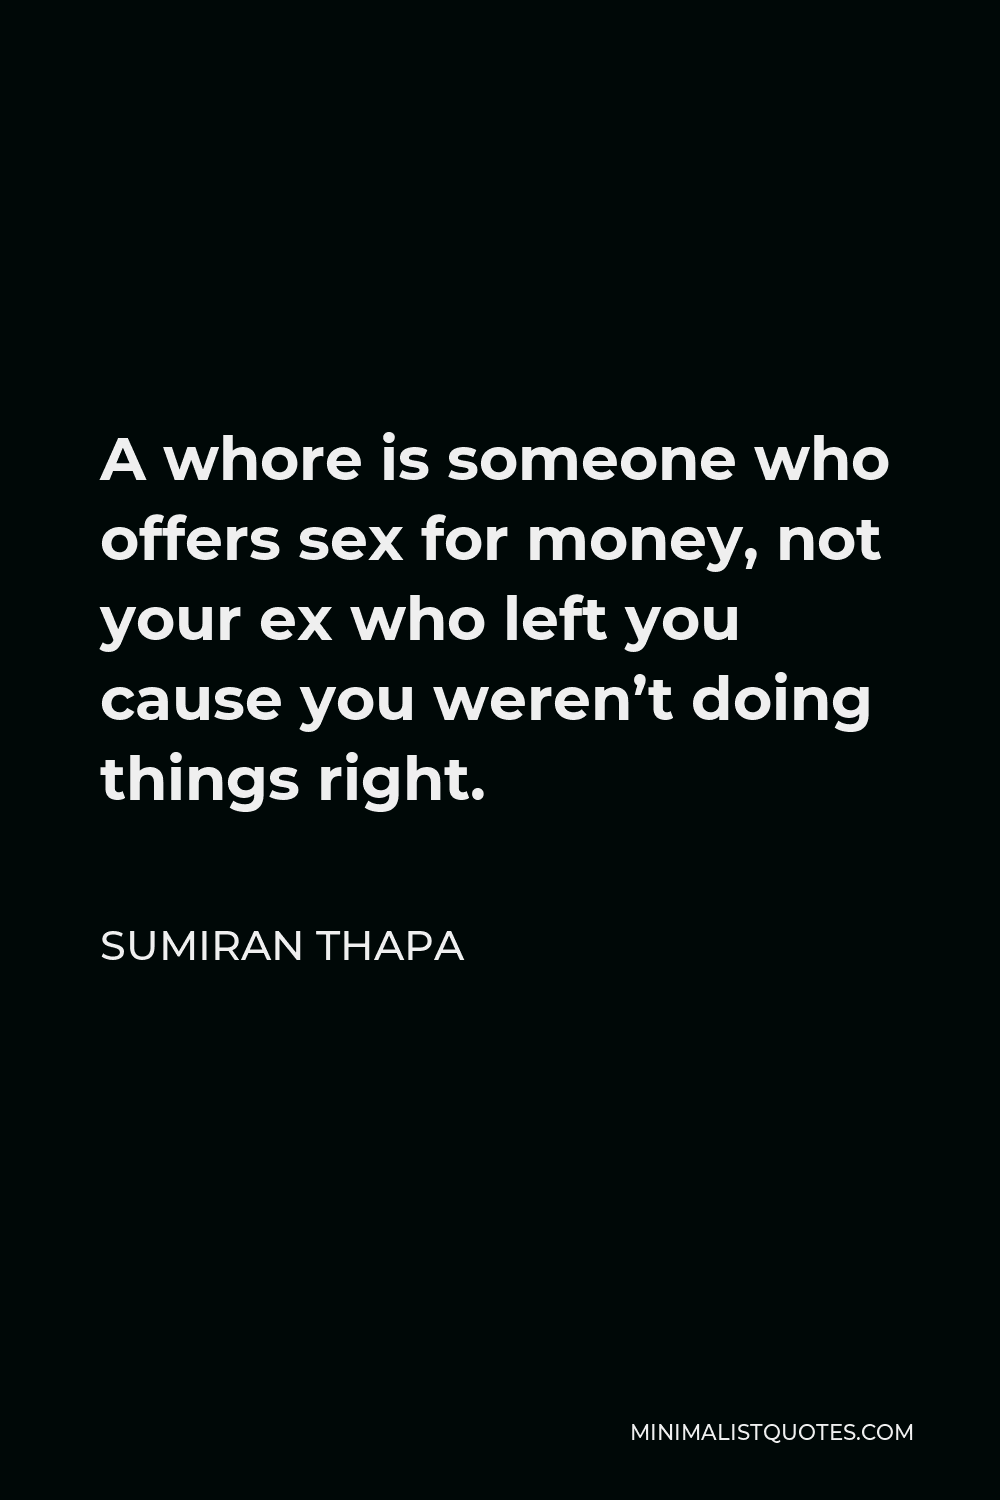 Sumiran Thapa Quote - A whore is someone who offers sex for money, not your ex who left you cause you weren’t doing things right.